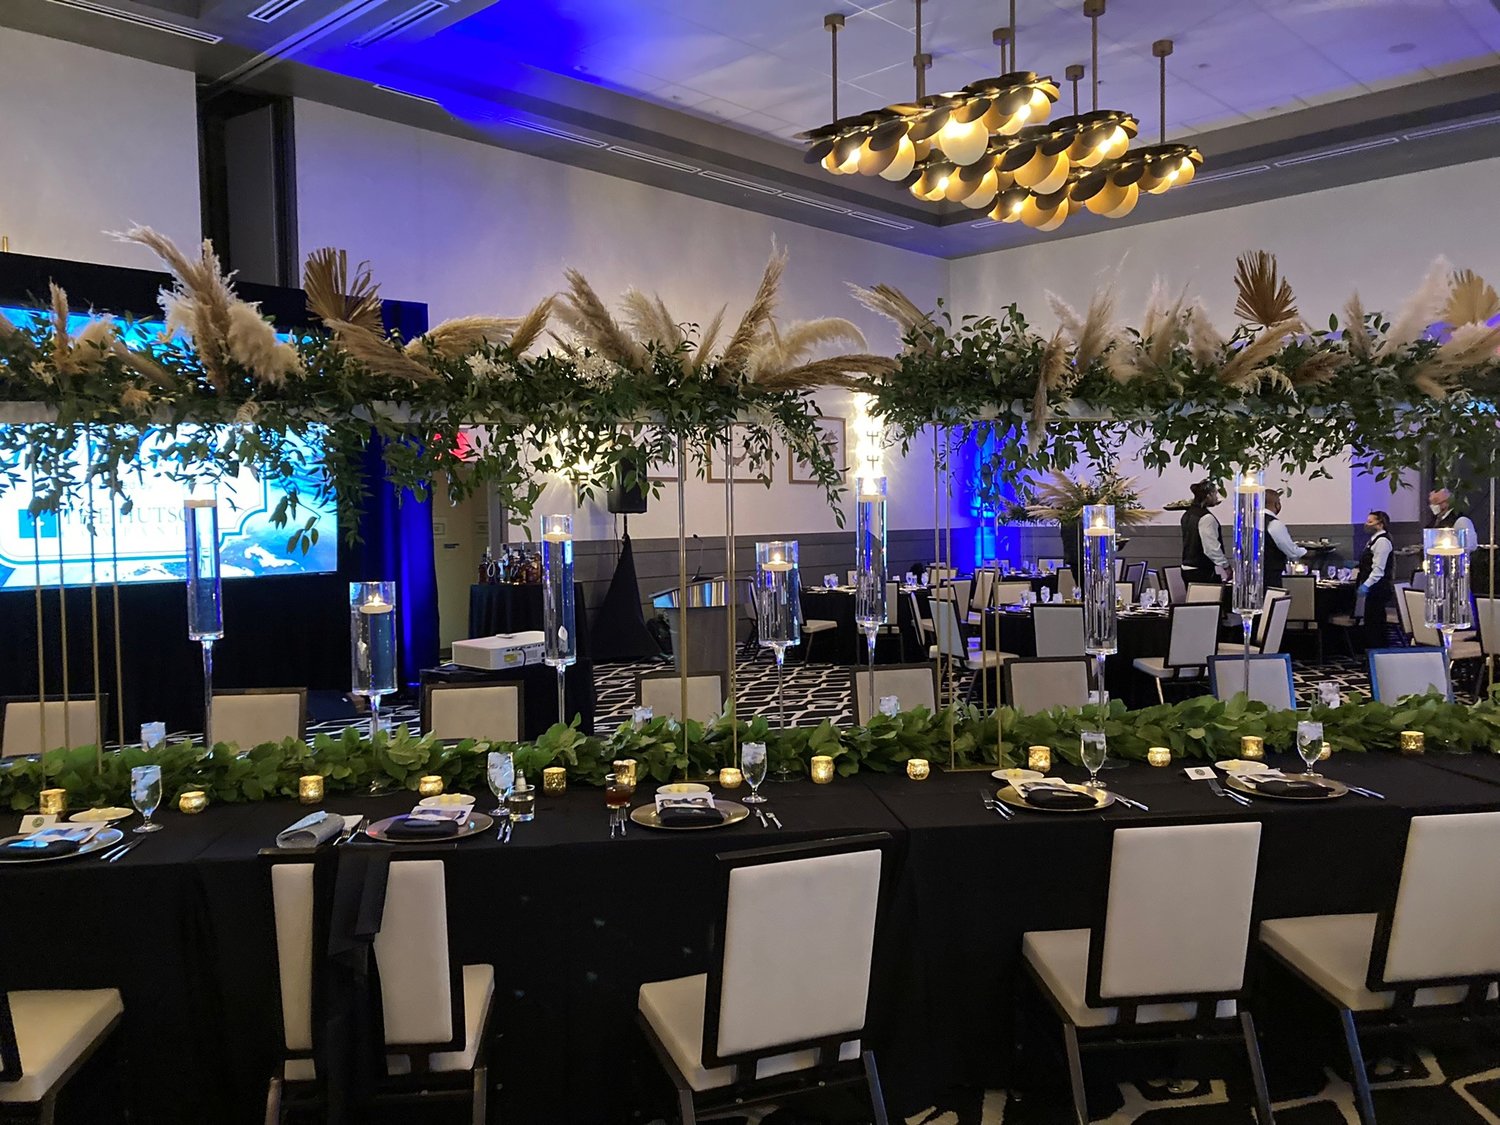 The 5th Annual United Way of St. Johns Givers Gala was held at the Embassy Suites by Hilton St. Augustine Beach Oceanfront Resort.